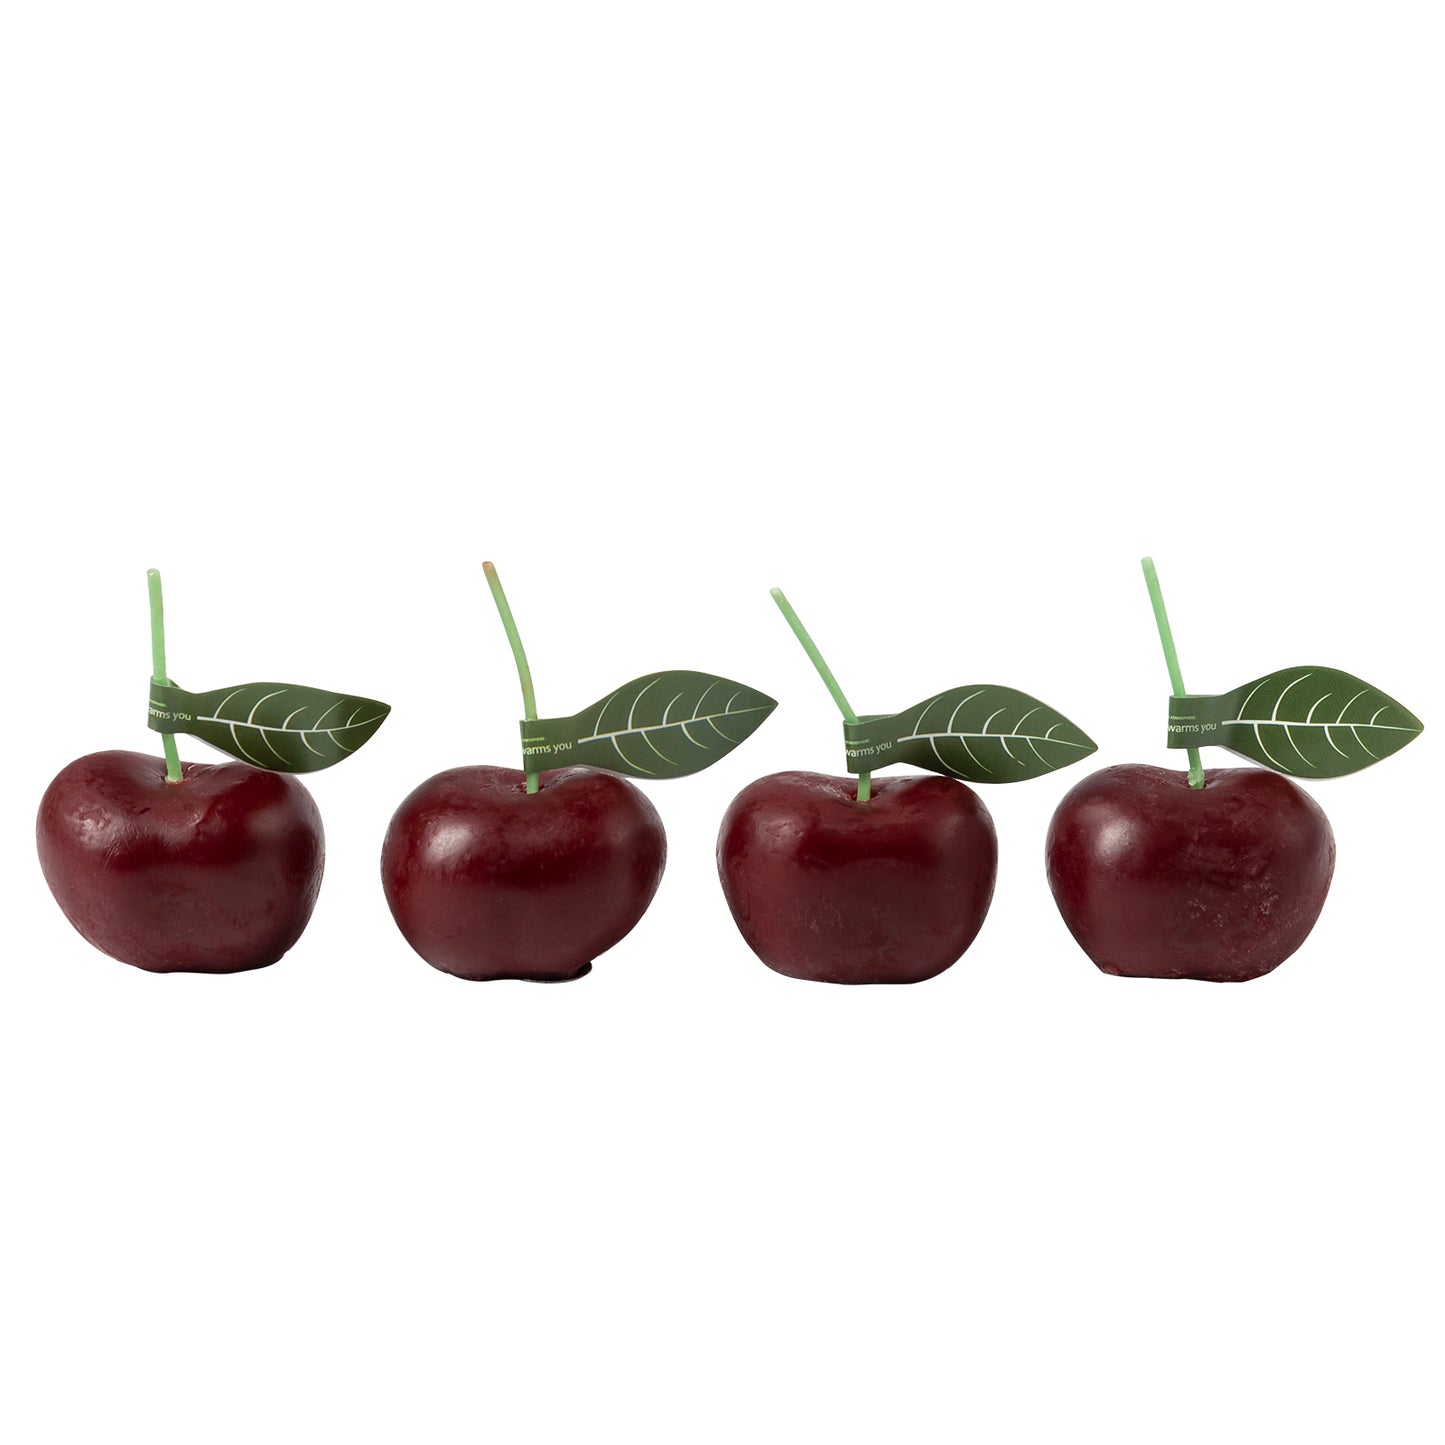 REJUUV 4Pcs Cherries Shaped Scented Candle with Sweet Fruit Aroma - Red, Black Red